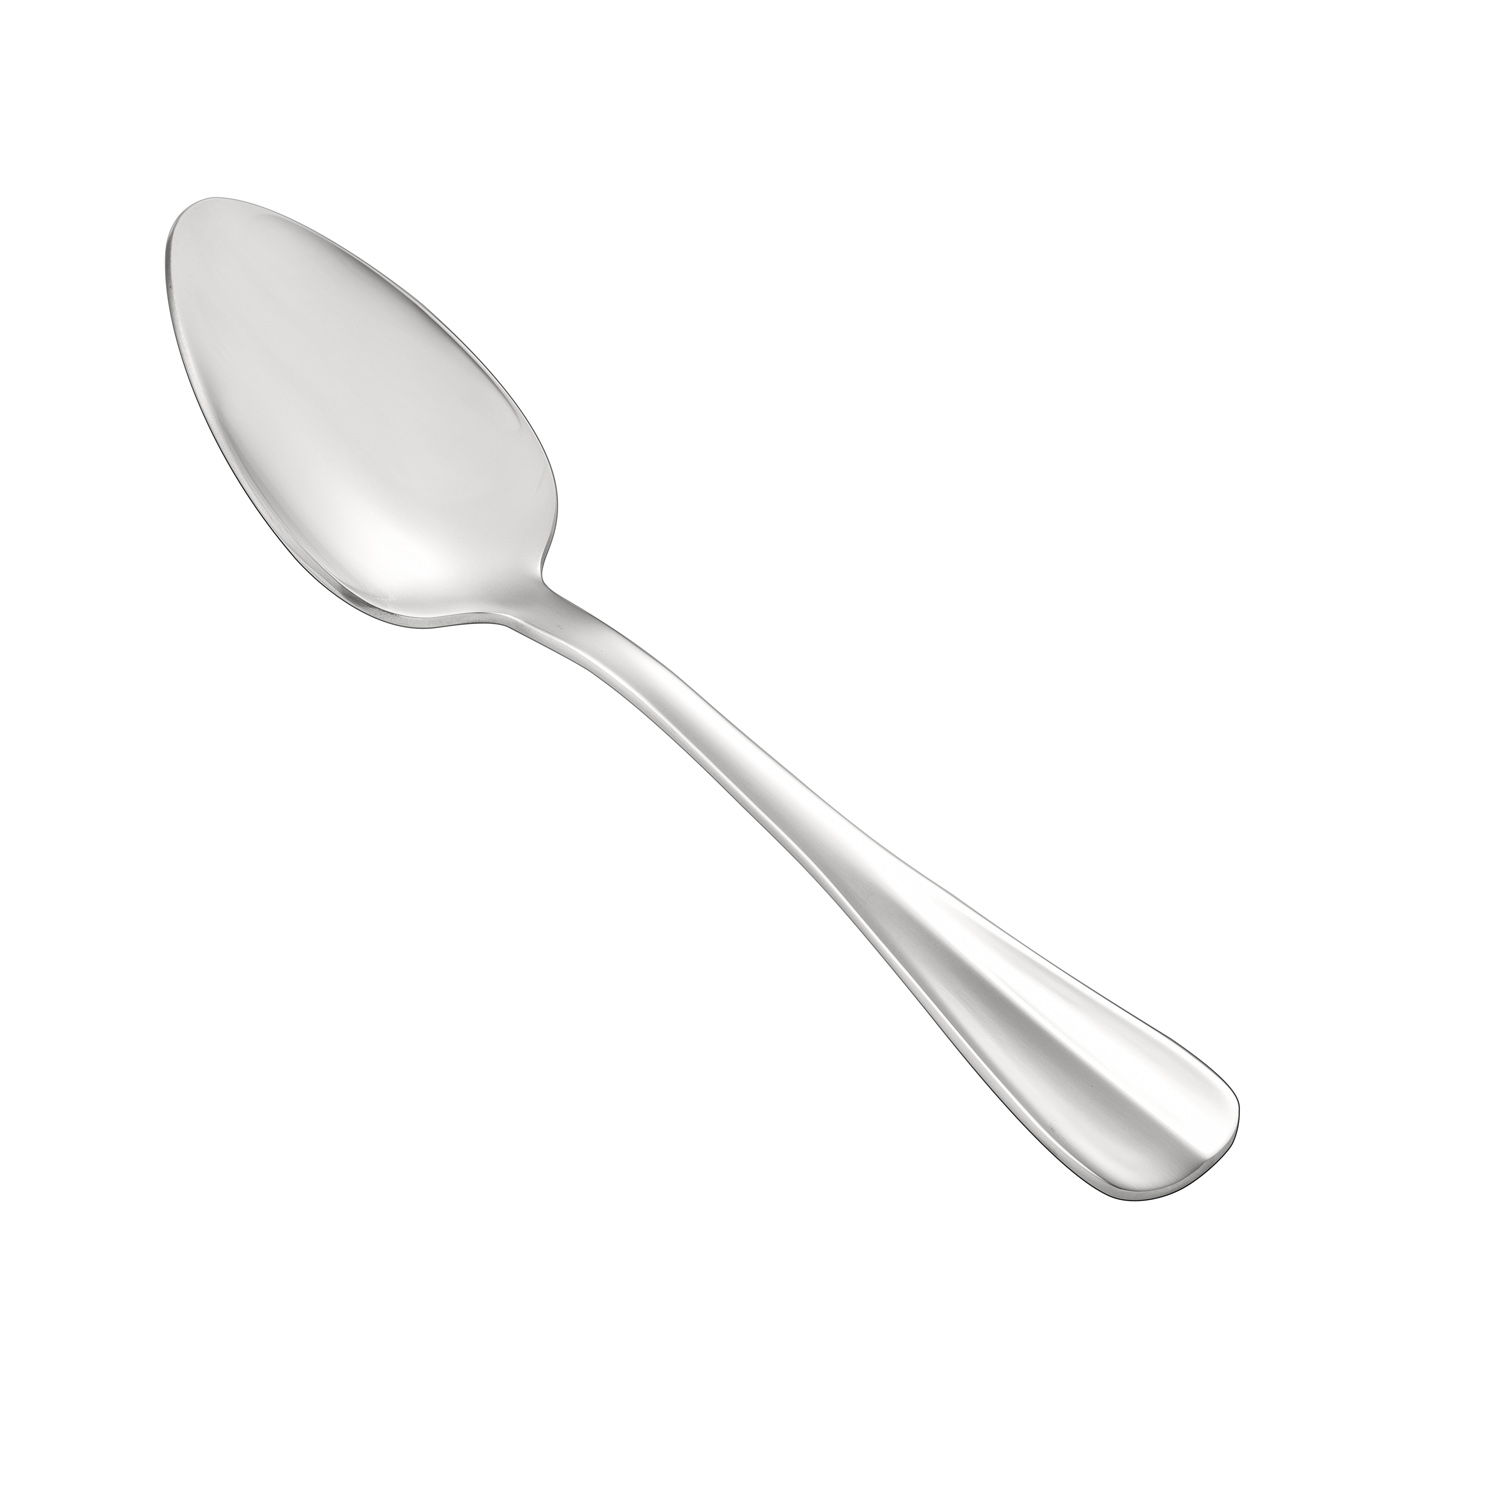 CAC China 8005-01 Exquisite Teaspoon, Extra Heavyweight 18/8, 6"